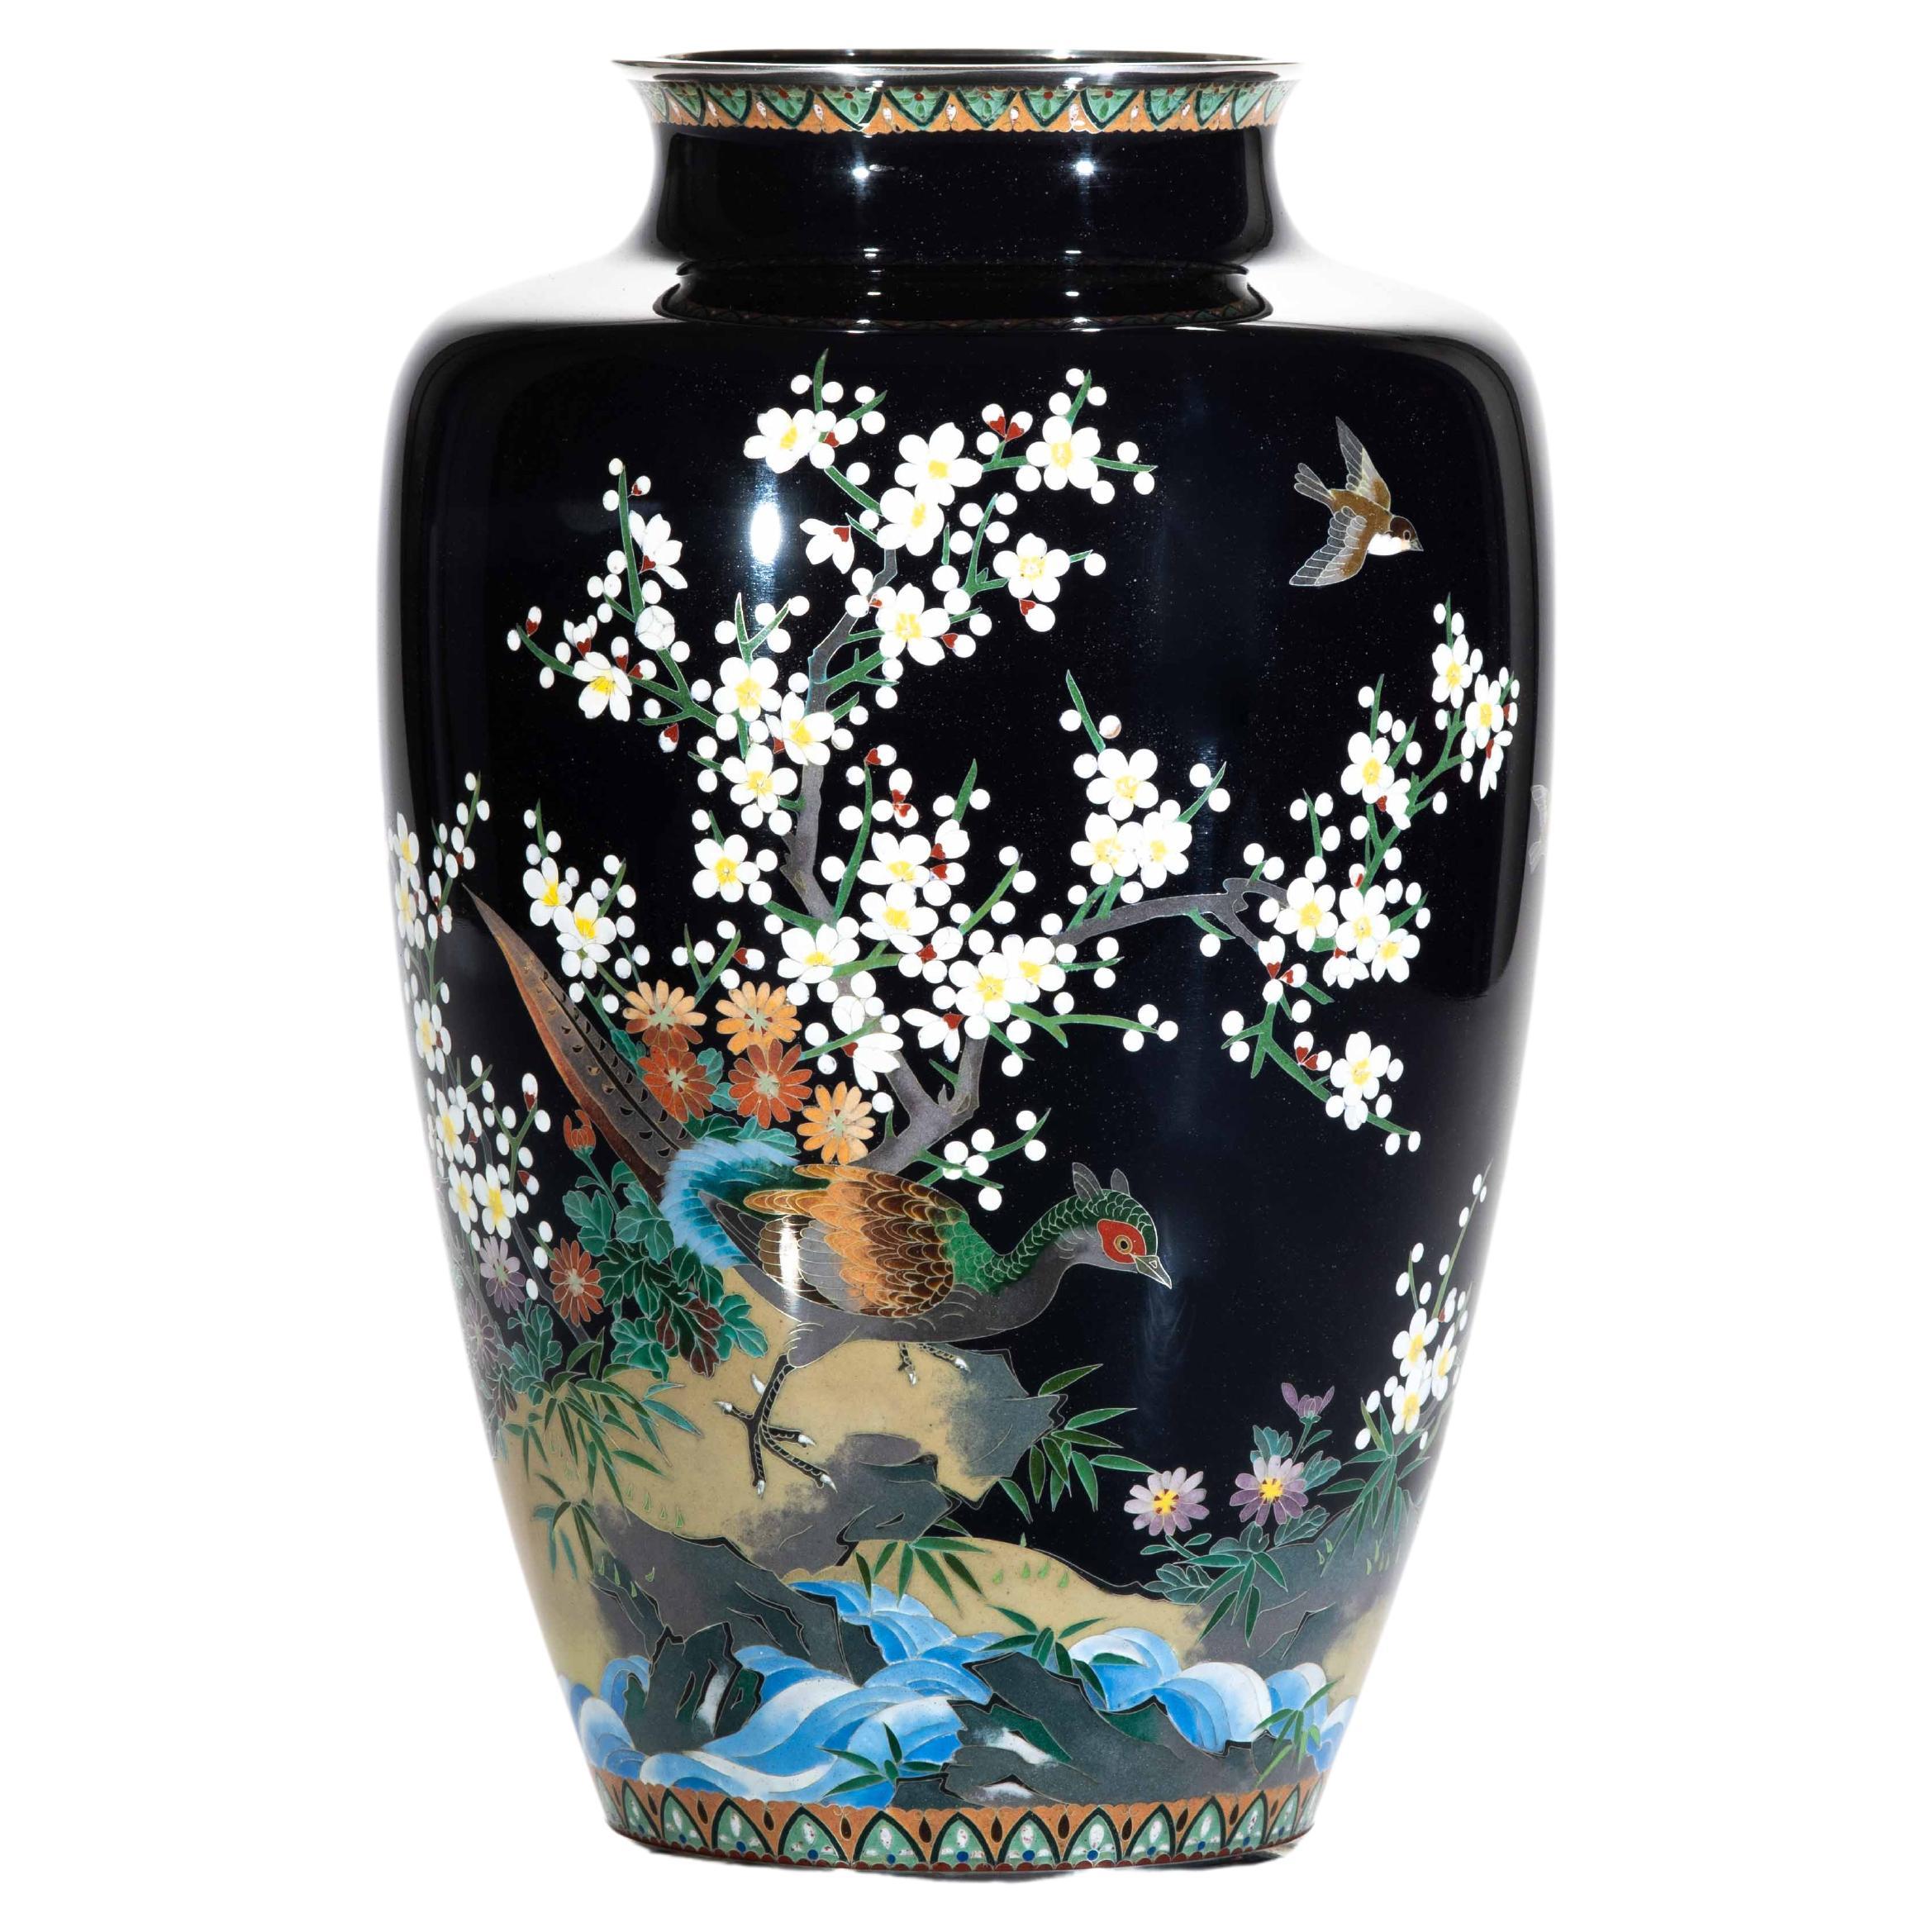 A cloisonné vase depicting a pheasant surrounded by blooming cherry